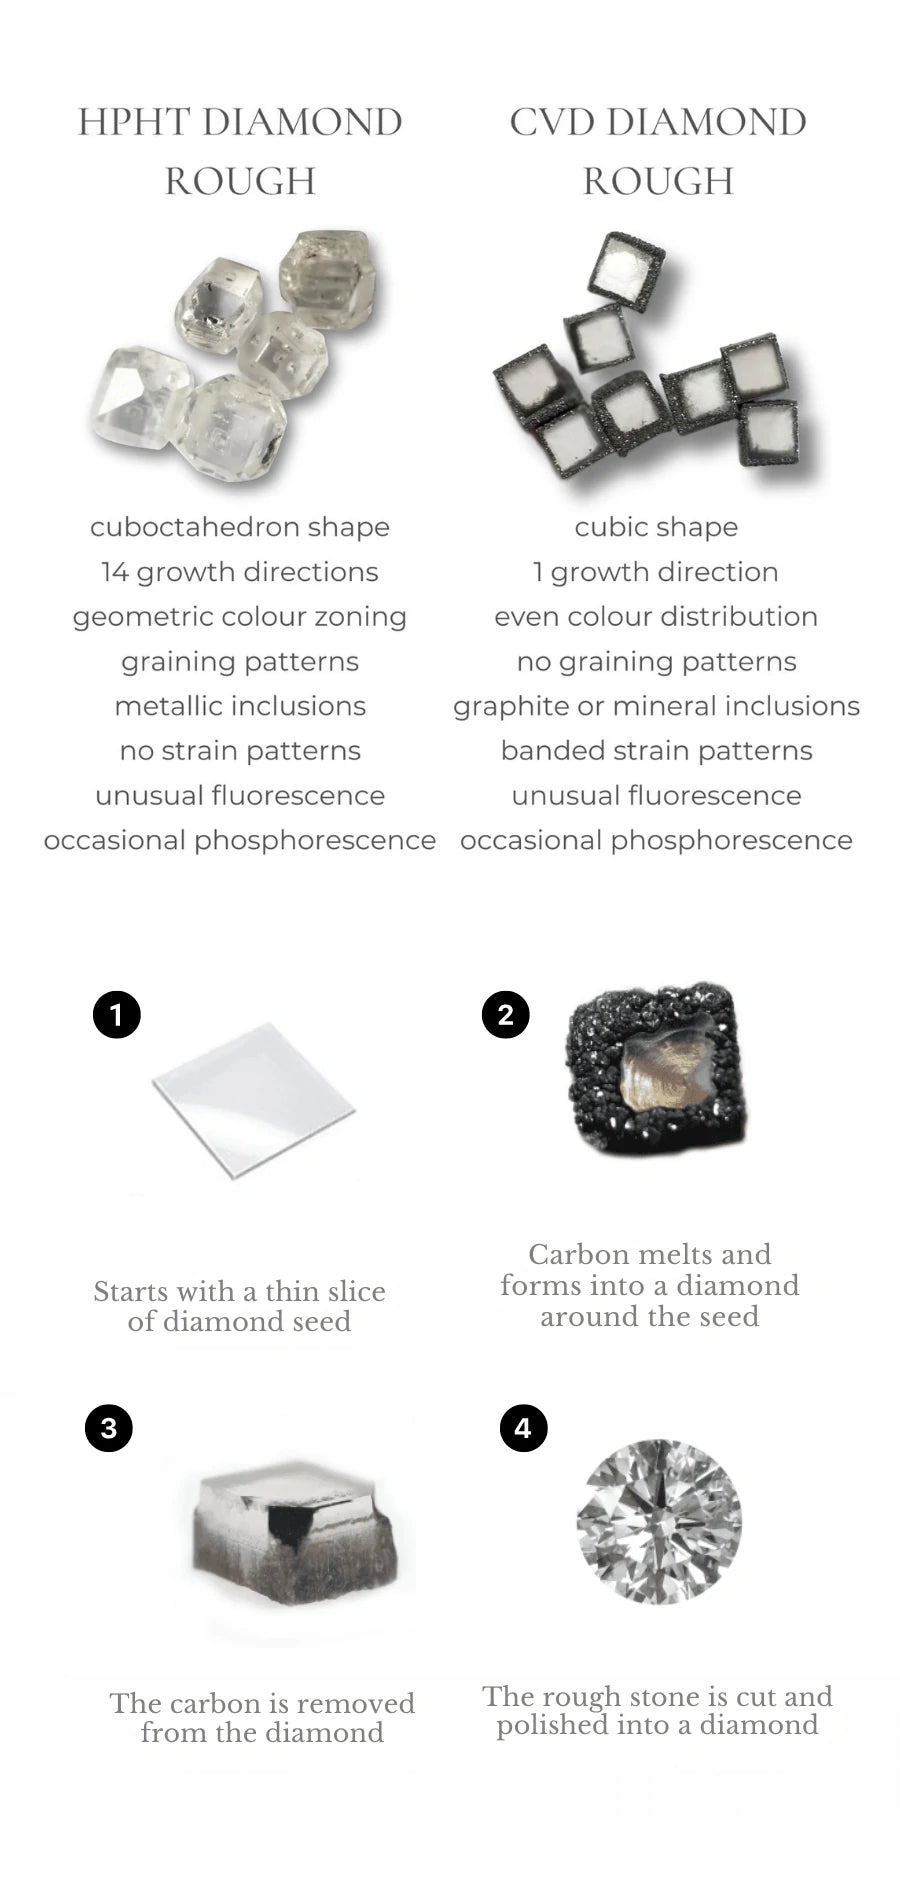 The Production Process of Lab-Grown Diamonds